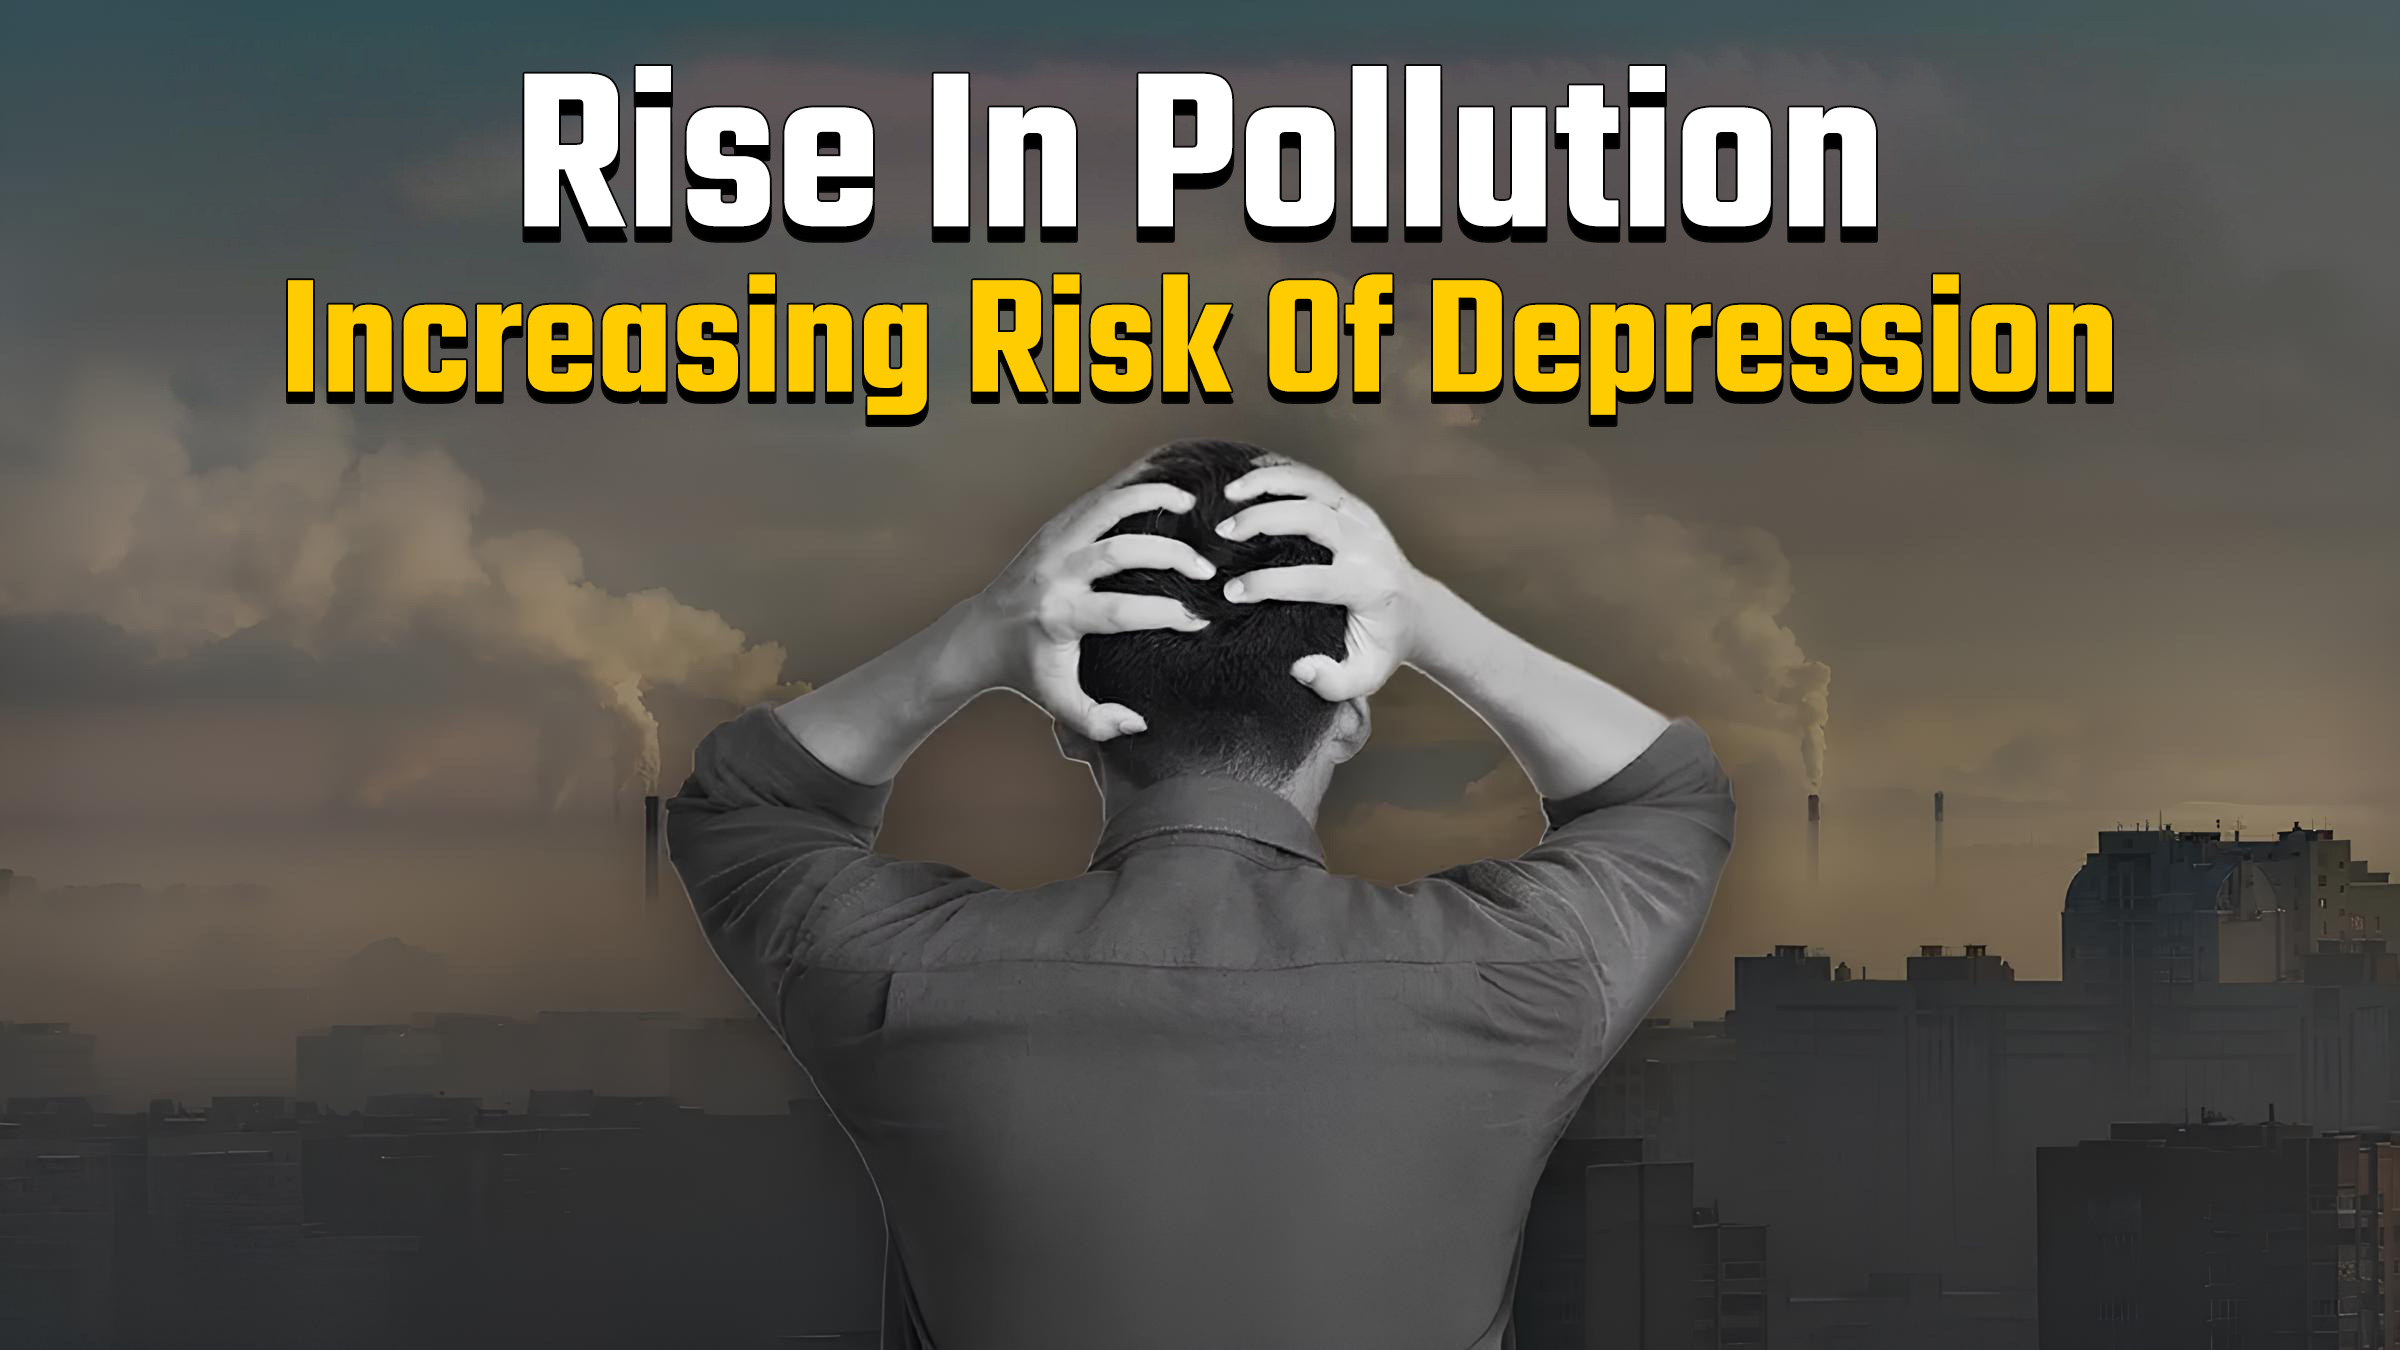 Air Pollution Taking A Toll On Mental Health, Affecting Sleep And Memory